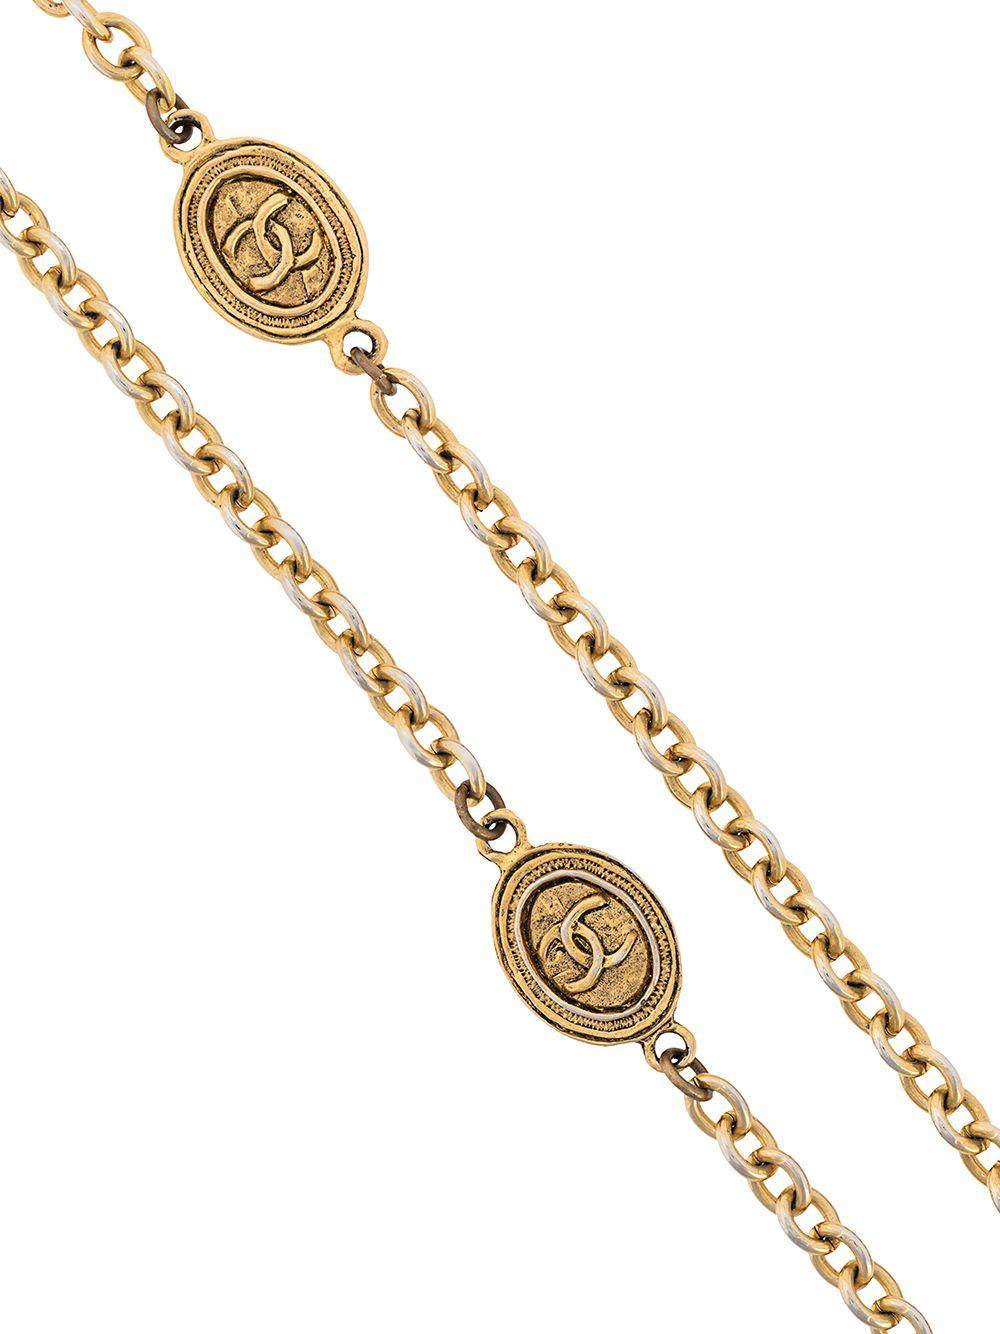 Whether you desire a pair of luminous and Baroque cultured necklace Chanel has the jewelry design that perfectly fits your personal style. Crafted in France from gold-toned metal hardware Chanel necklace add a little sophistication to your look as